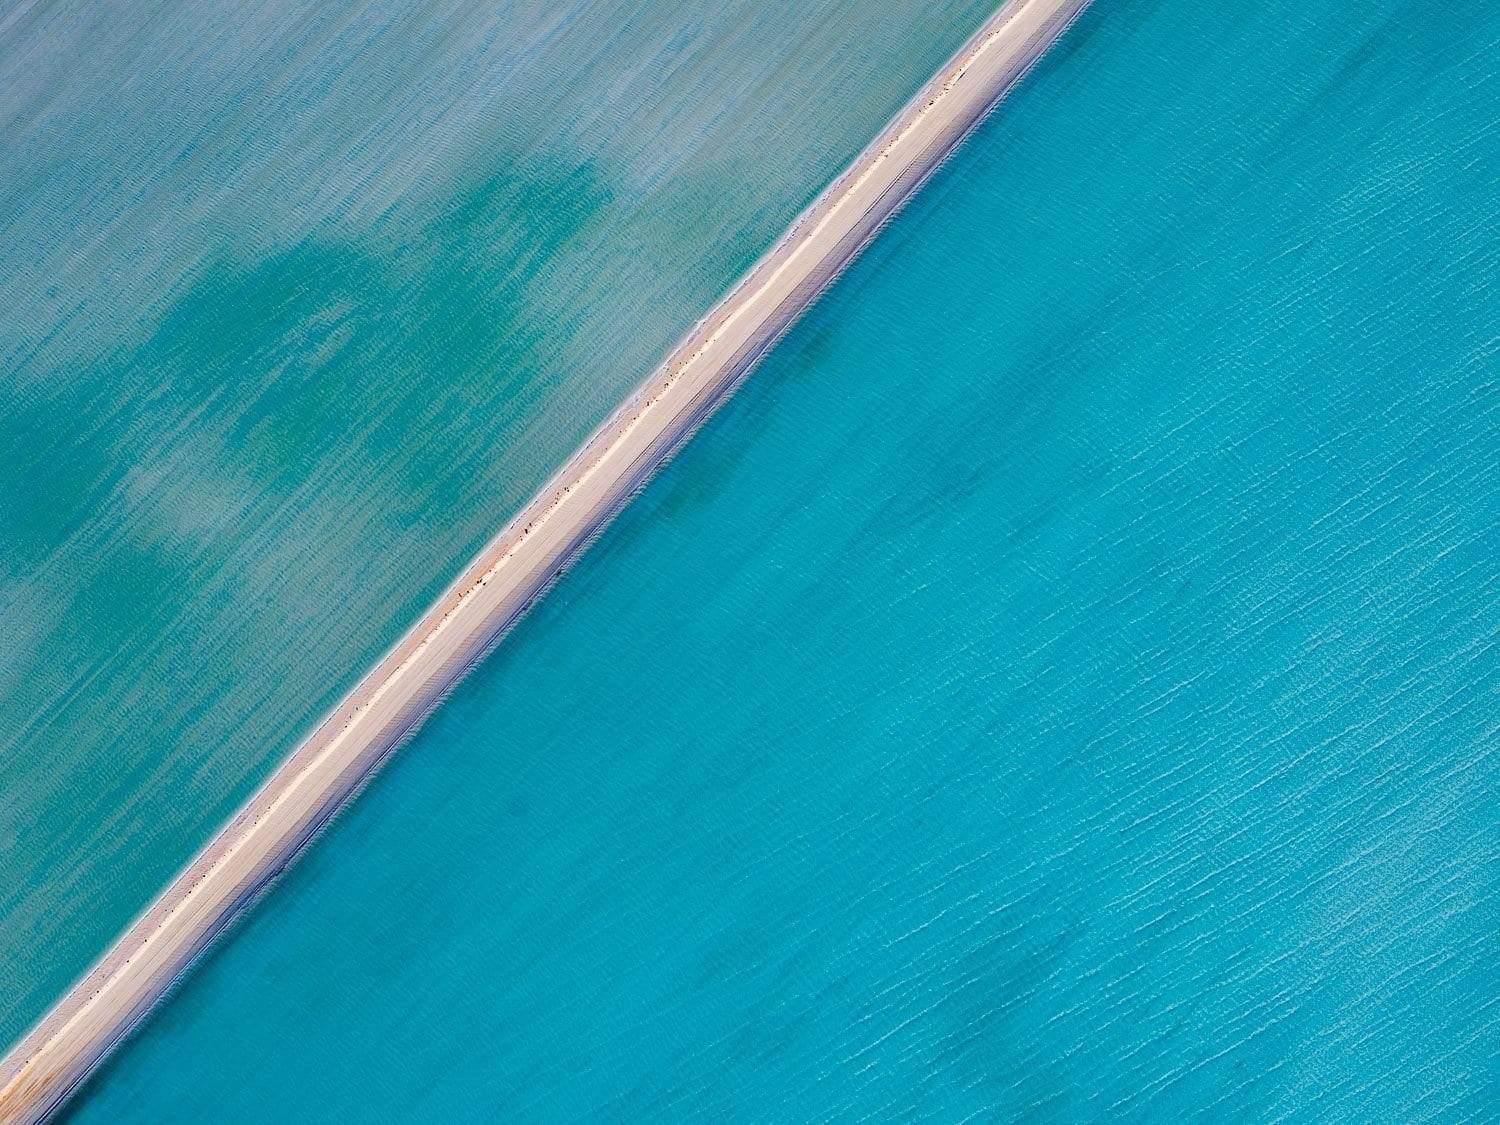 Aerial view of the separation of blue oceans, Shades of Blue